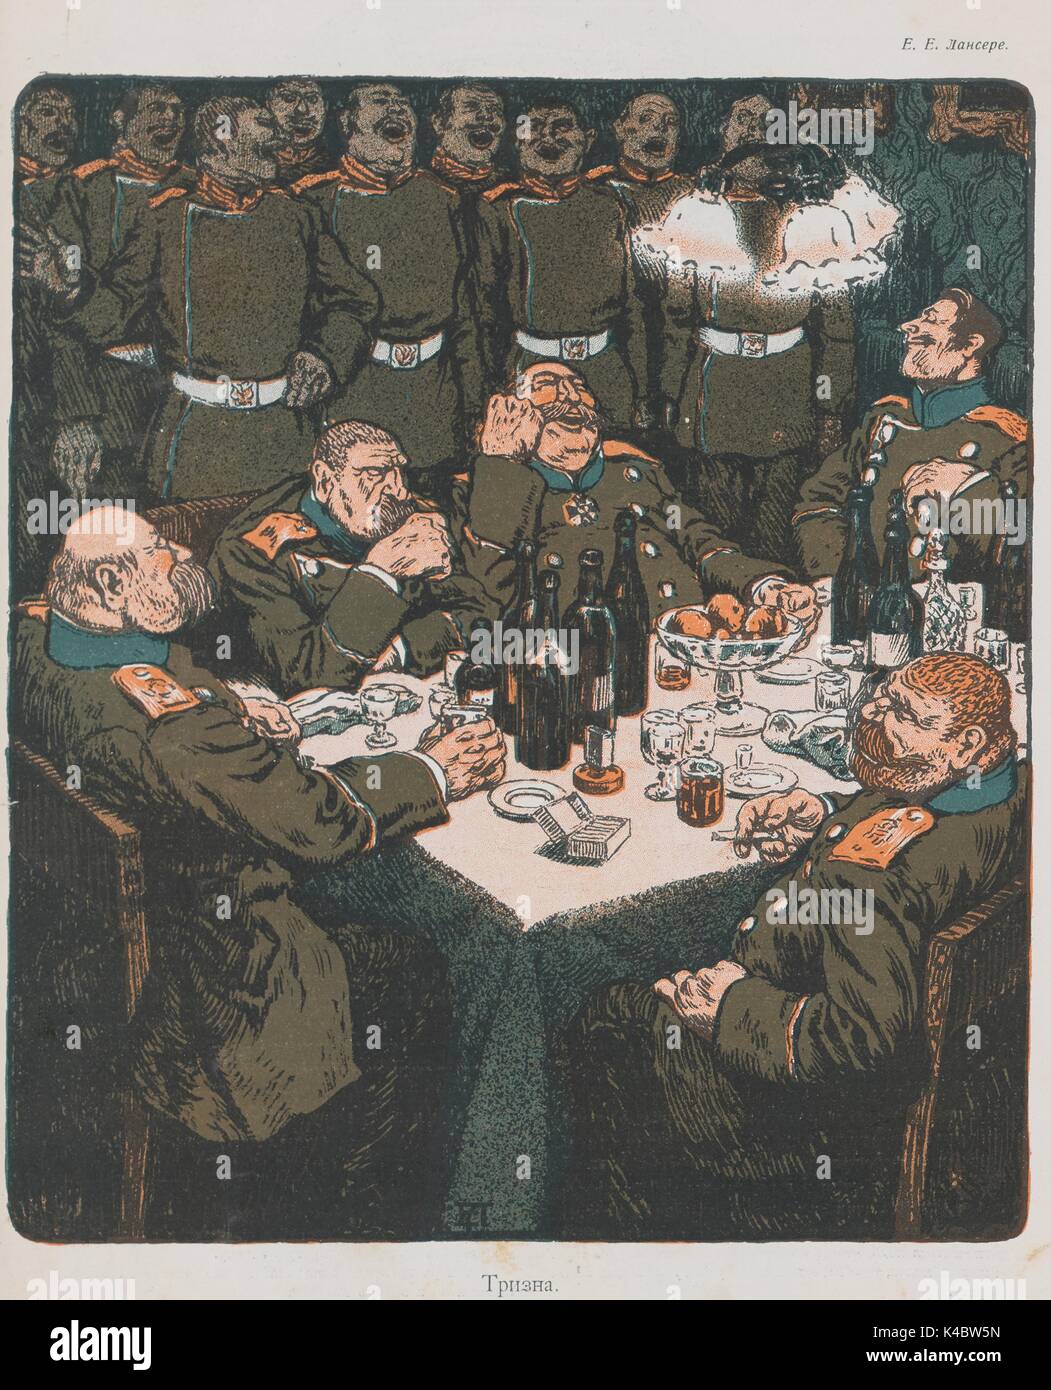 Cartoon showing caricature of officers with large and grotesque bodies sitting around a table, drinking, smoking and laughing as enlisted soldiers stand and laugh in the background, captioned Funeral Feast, from the Russian satirical journal Adskaia Pochta (Infernal Mail), 1906. The cartoon satirizes the Tzar's army following the Russian revolution. Stock Photo